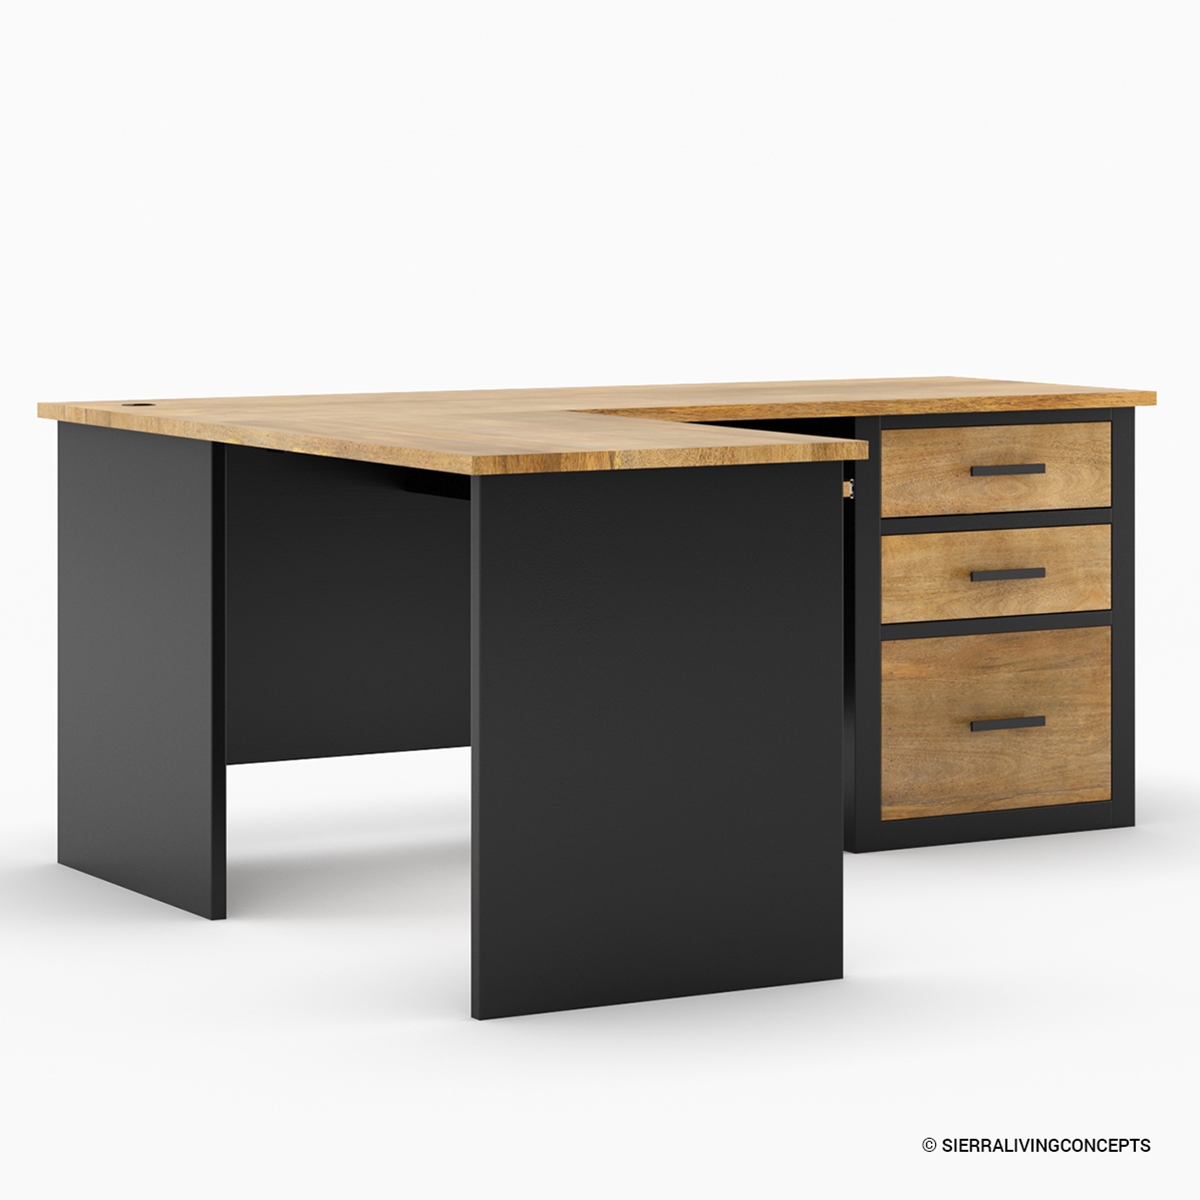 https://www.sierralivingconcepts.com/images/thumbs/0412543_kristiansand-solid-wood-l-shaped-home-office-desk-with-file-cabinets.jpeg